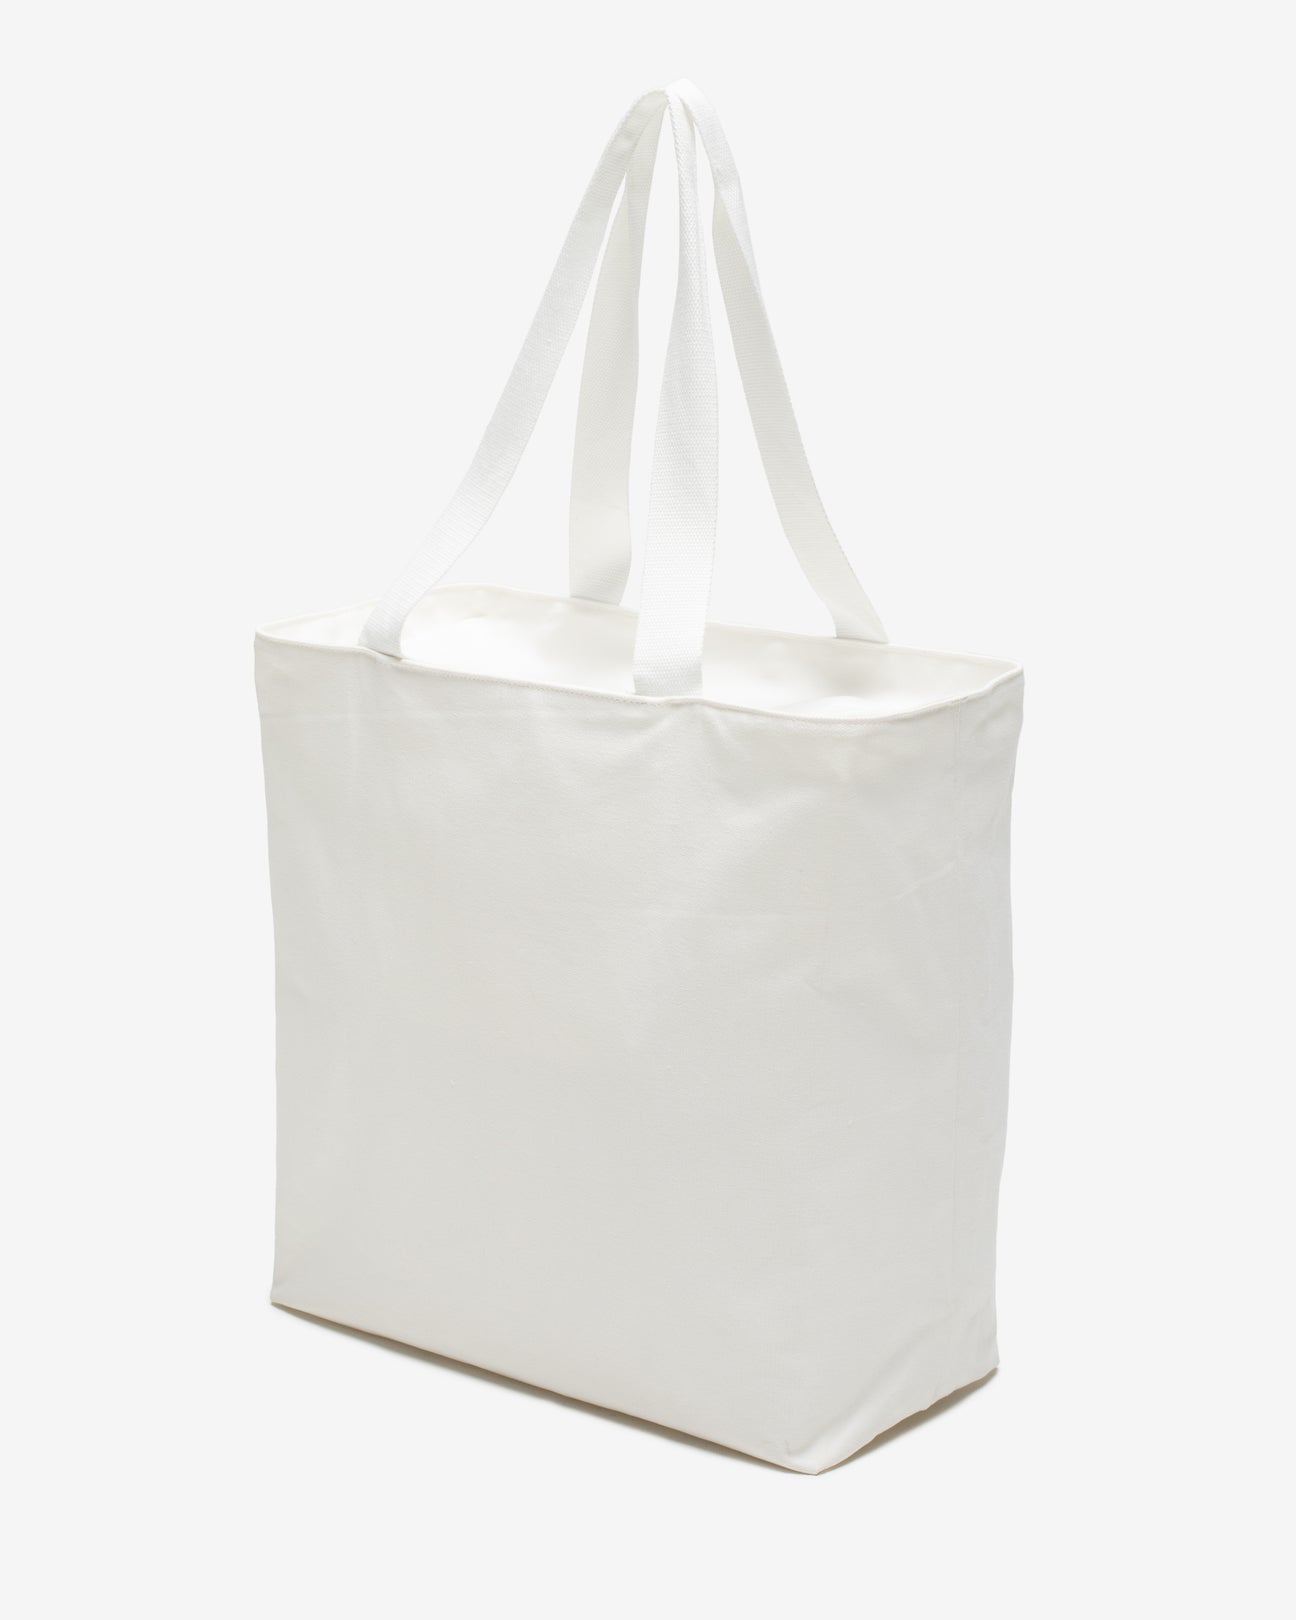 Undefeated Sporting Goods Tote- Natural